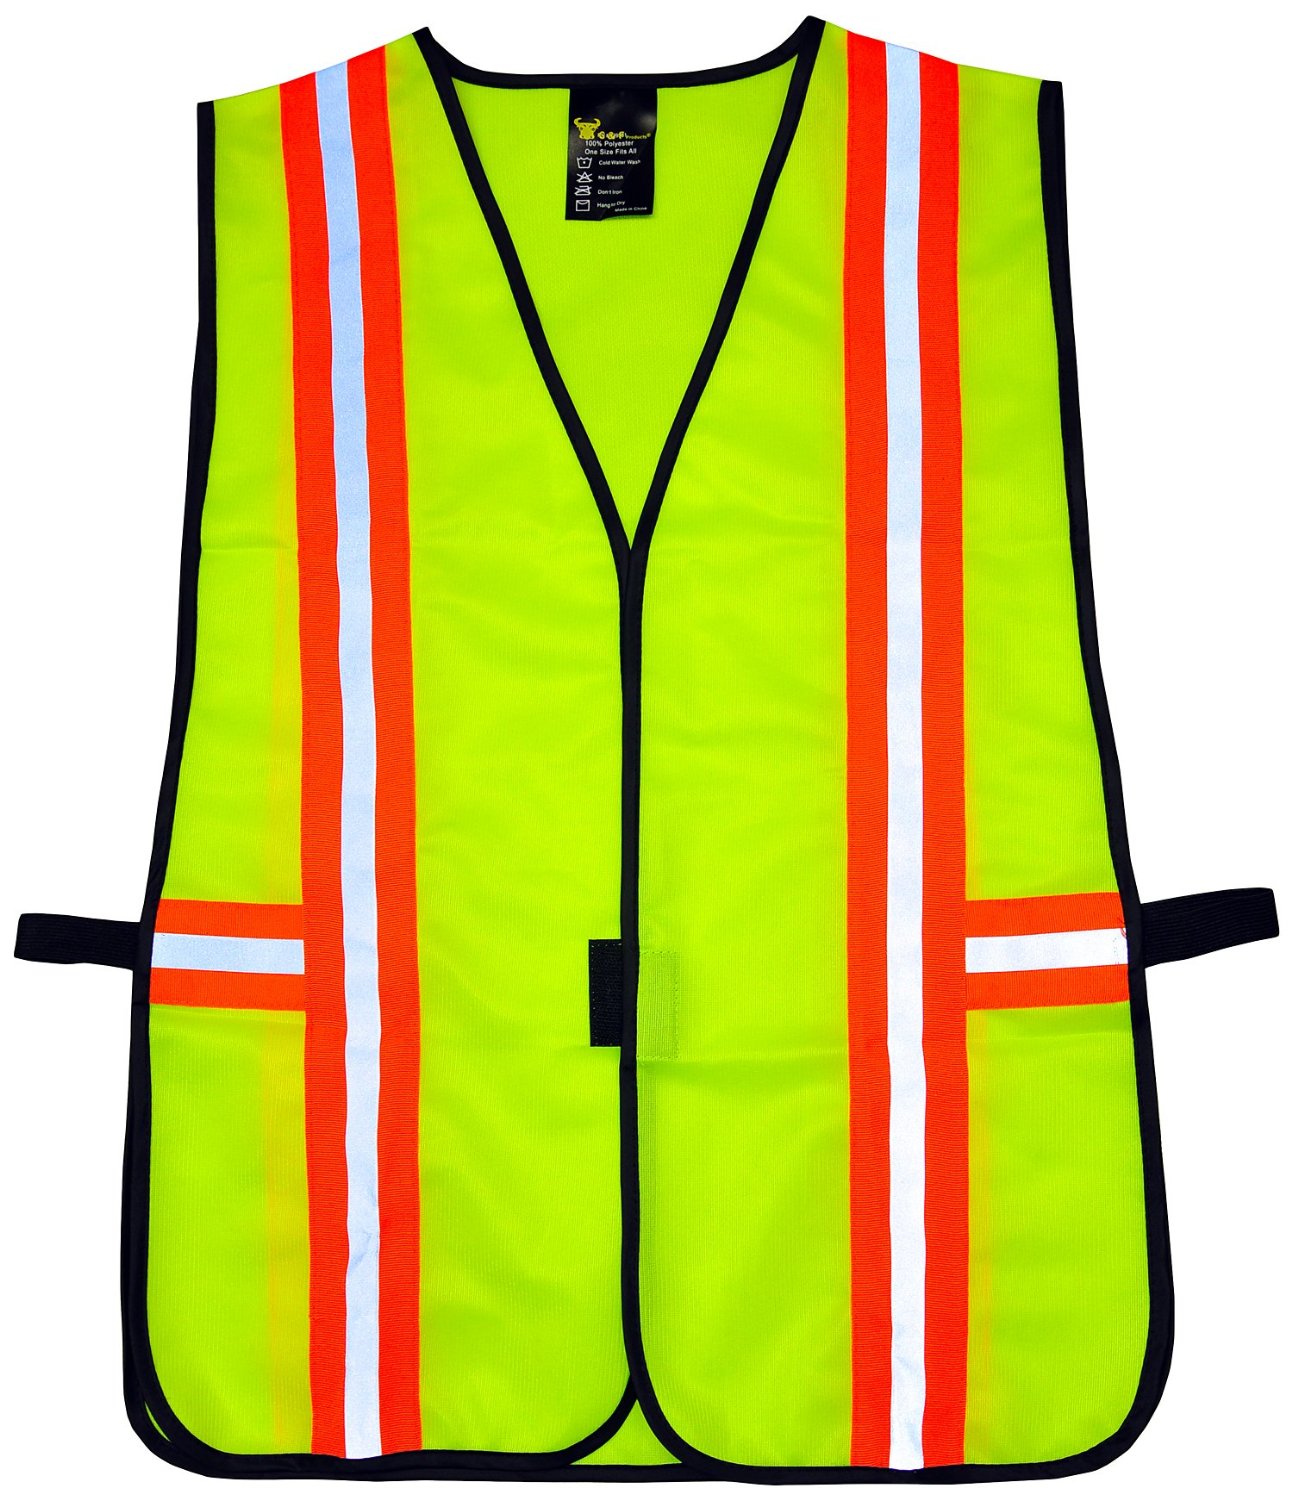 Boston Industrial Lime Green Safety Vest with Reflective Tape